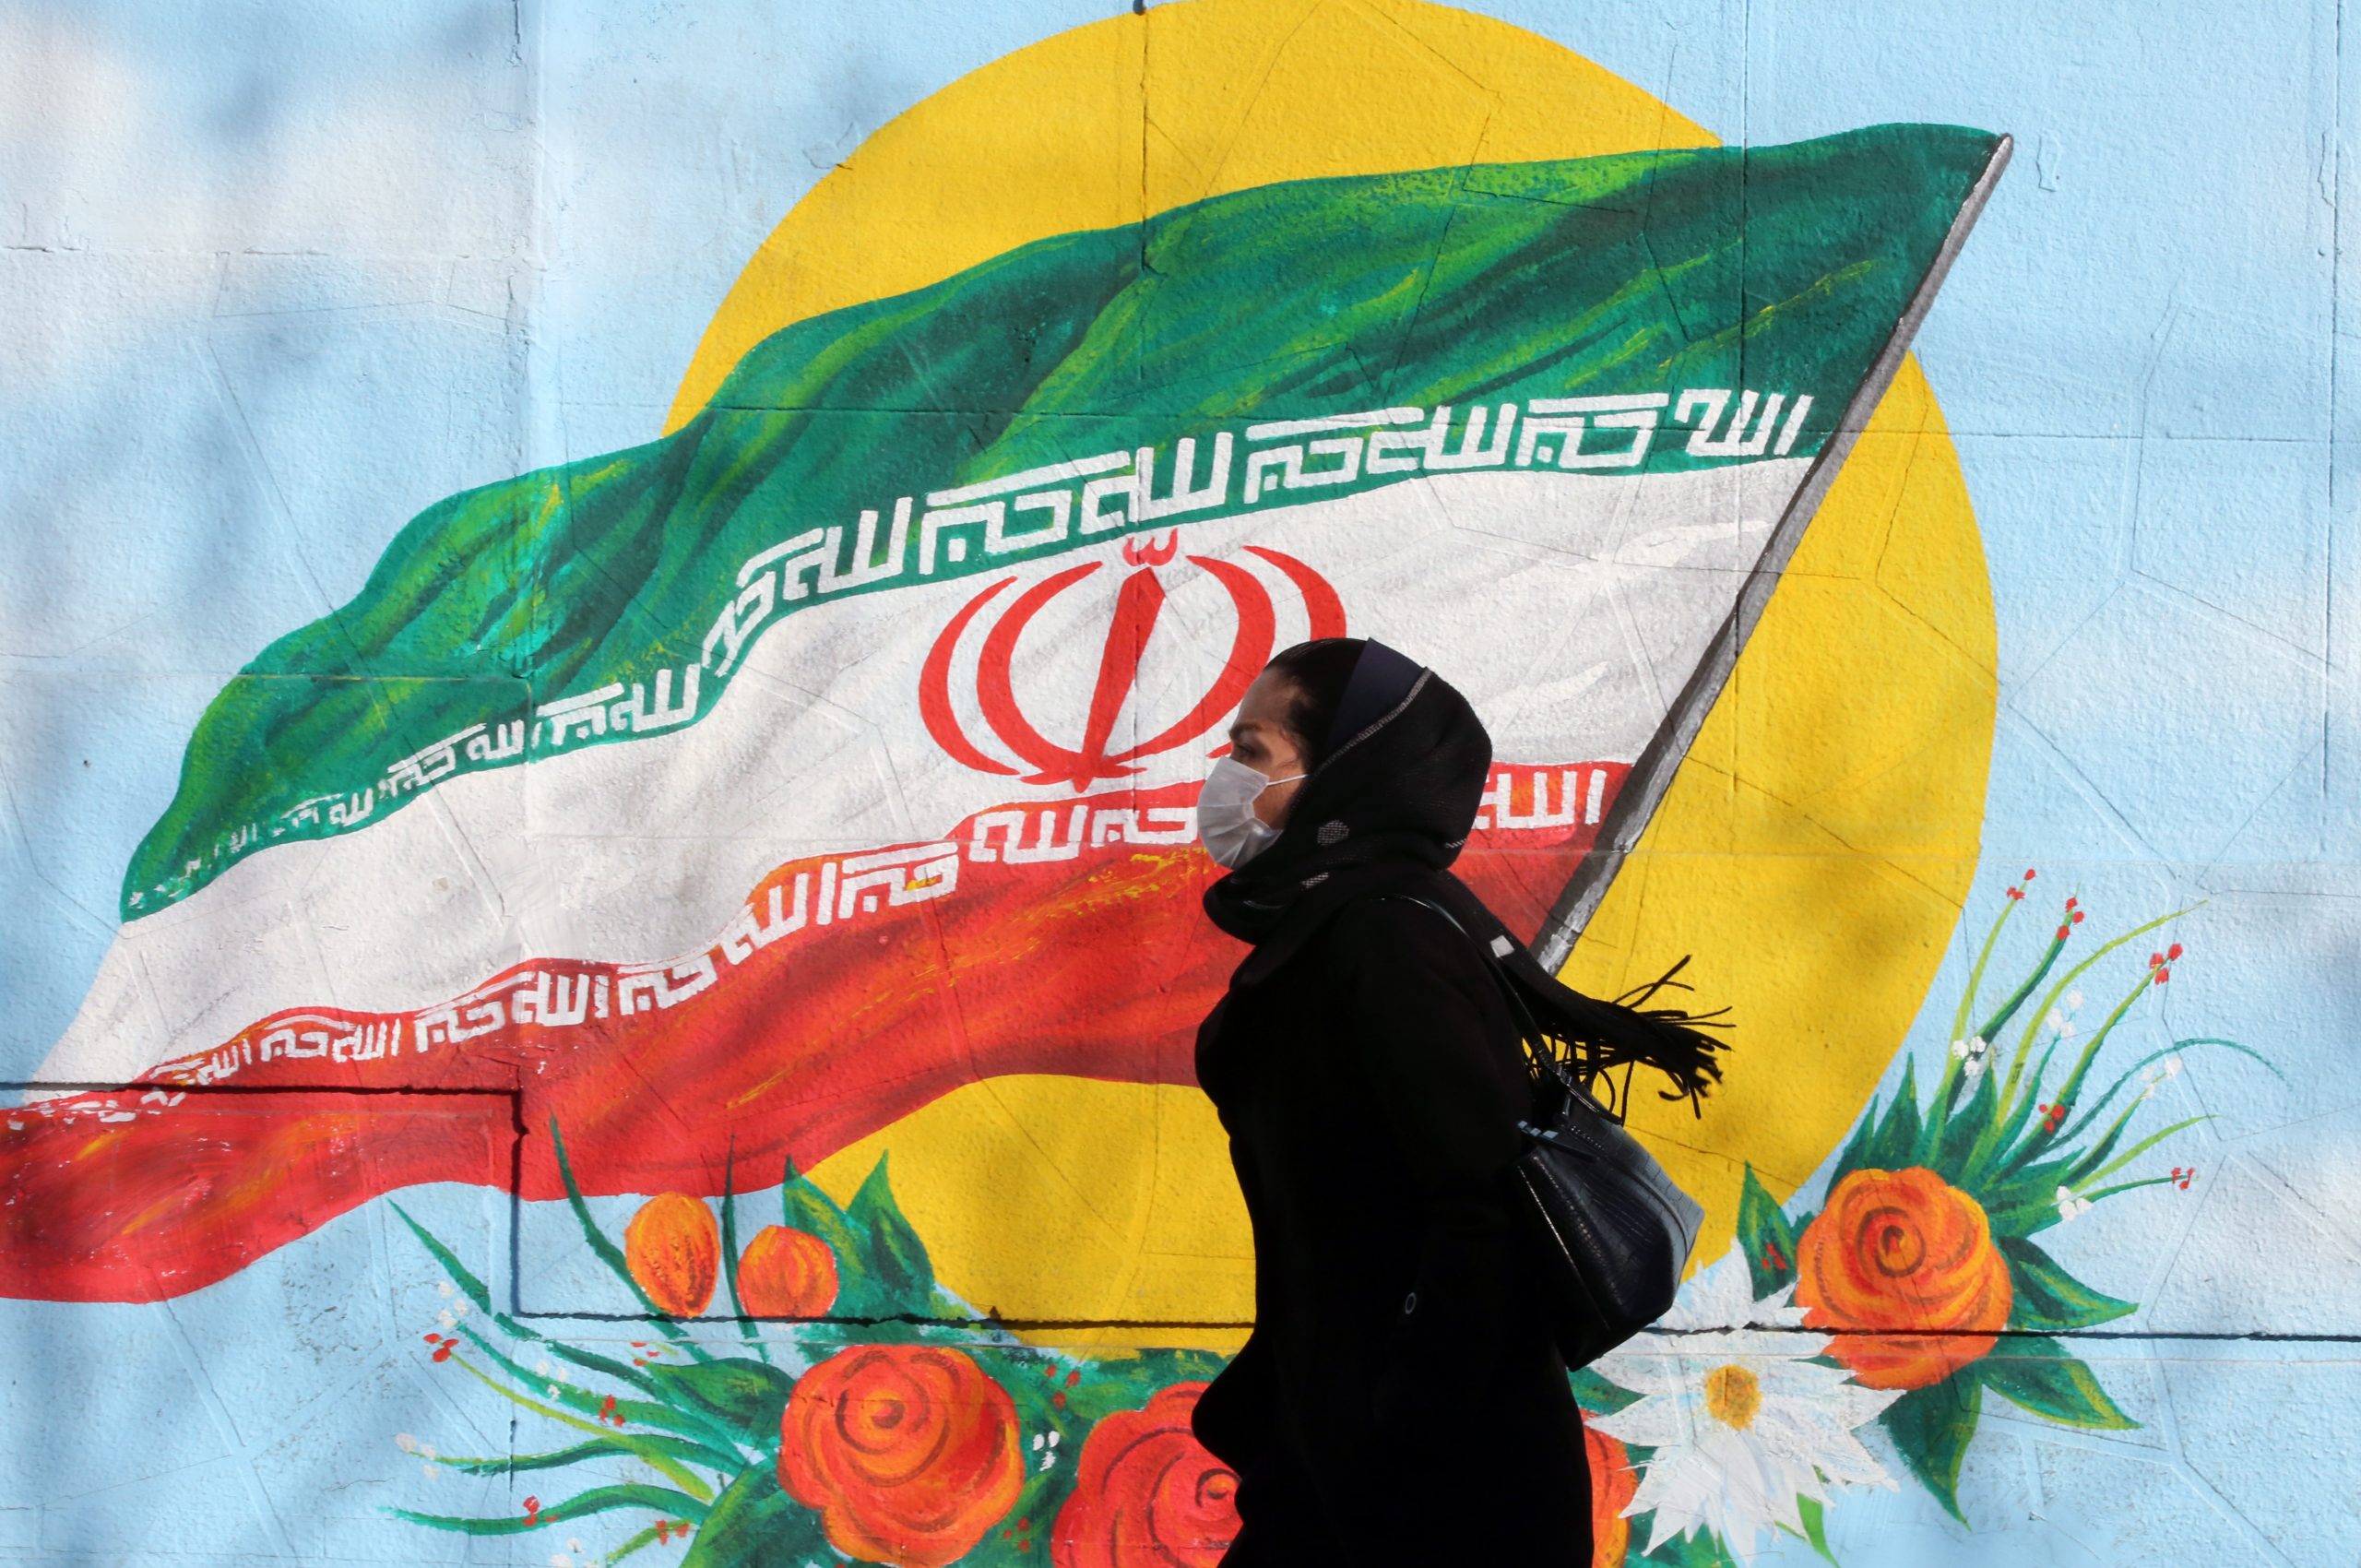 epa08228565 (FILE) - An Iranian woman wearing a mask walks next to a wall painting of Iranian national flag in Tehran, Iran, 12 February 2020 (reissued 19 February 2020). According to the Ministry of Health, two people diagnosed with coronavirus died in the city of Qom, central Iran.  EPA/ABEDIN TAHERKENAREH